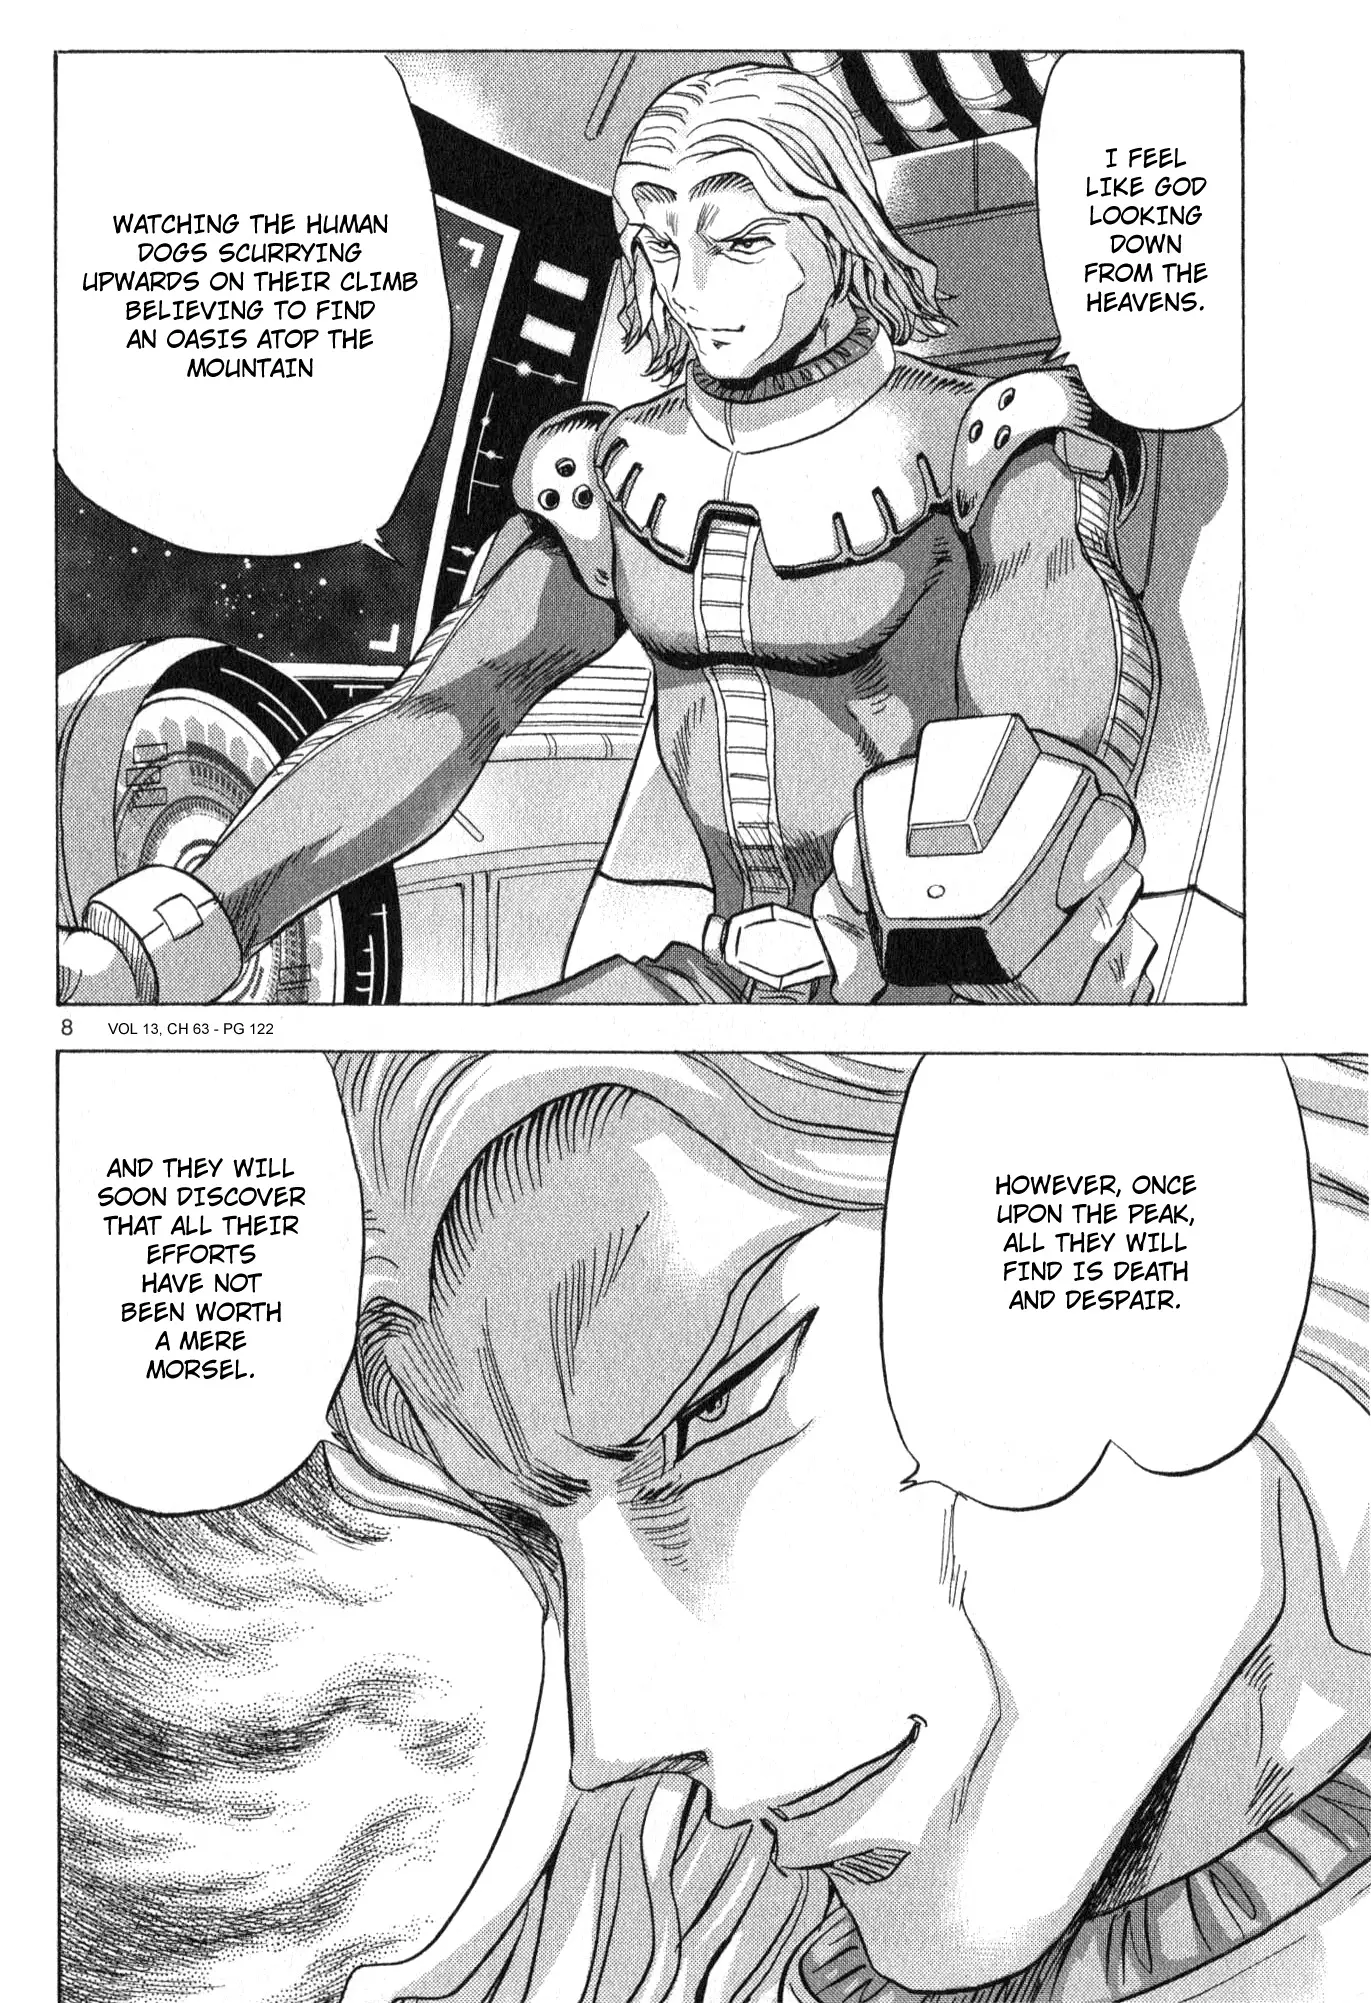 Mobile Suit Gundam Aggressor - 63 page 8-9aa2ad20